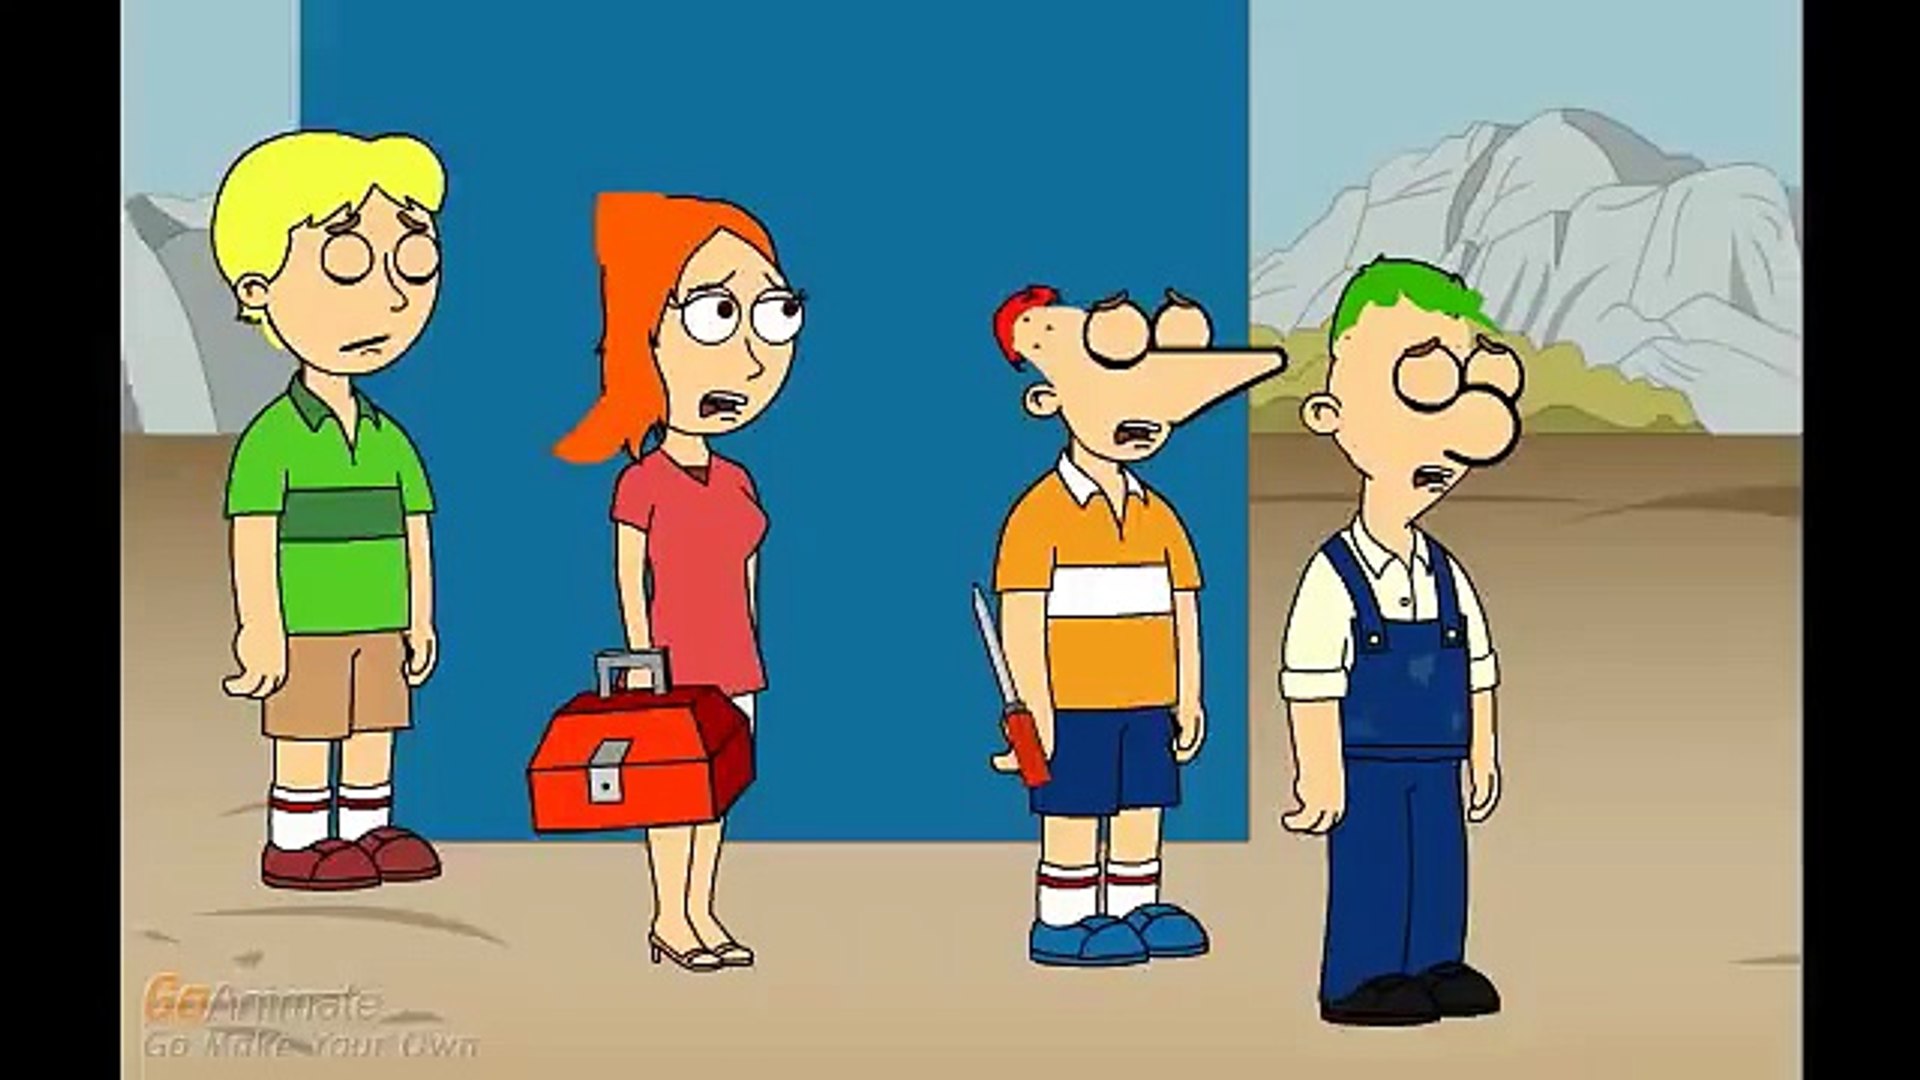 Phineas and Ferb get unbusted and creative again